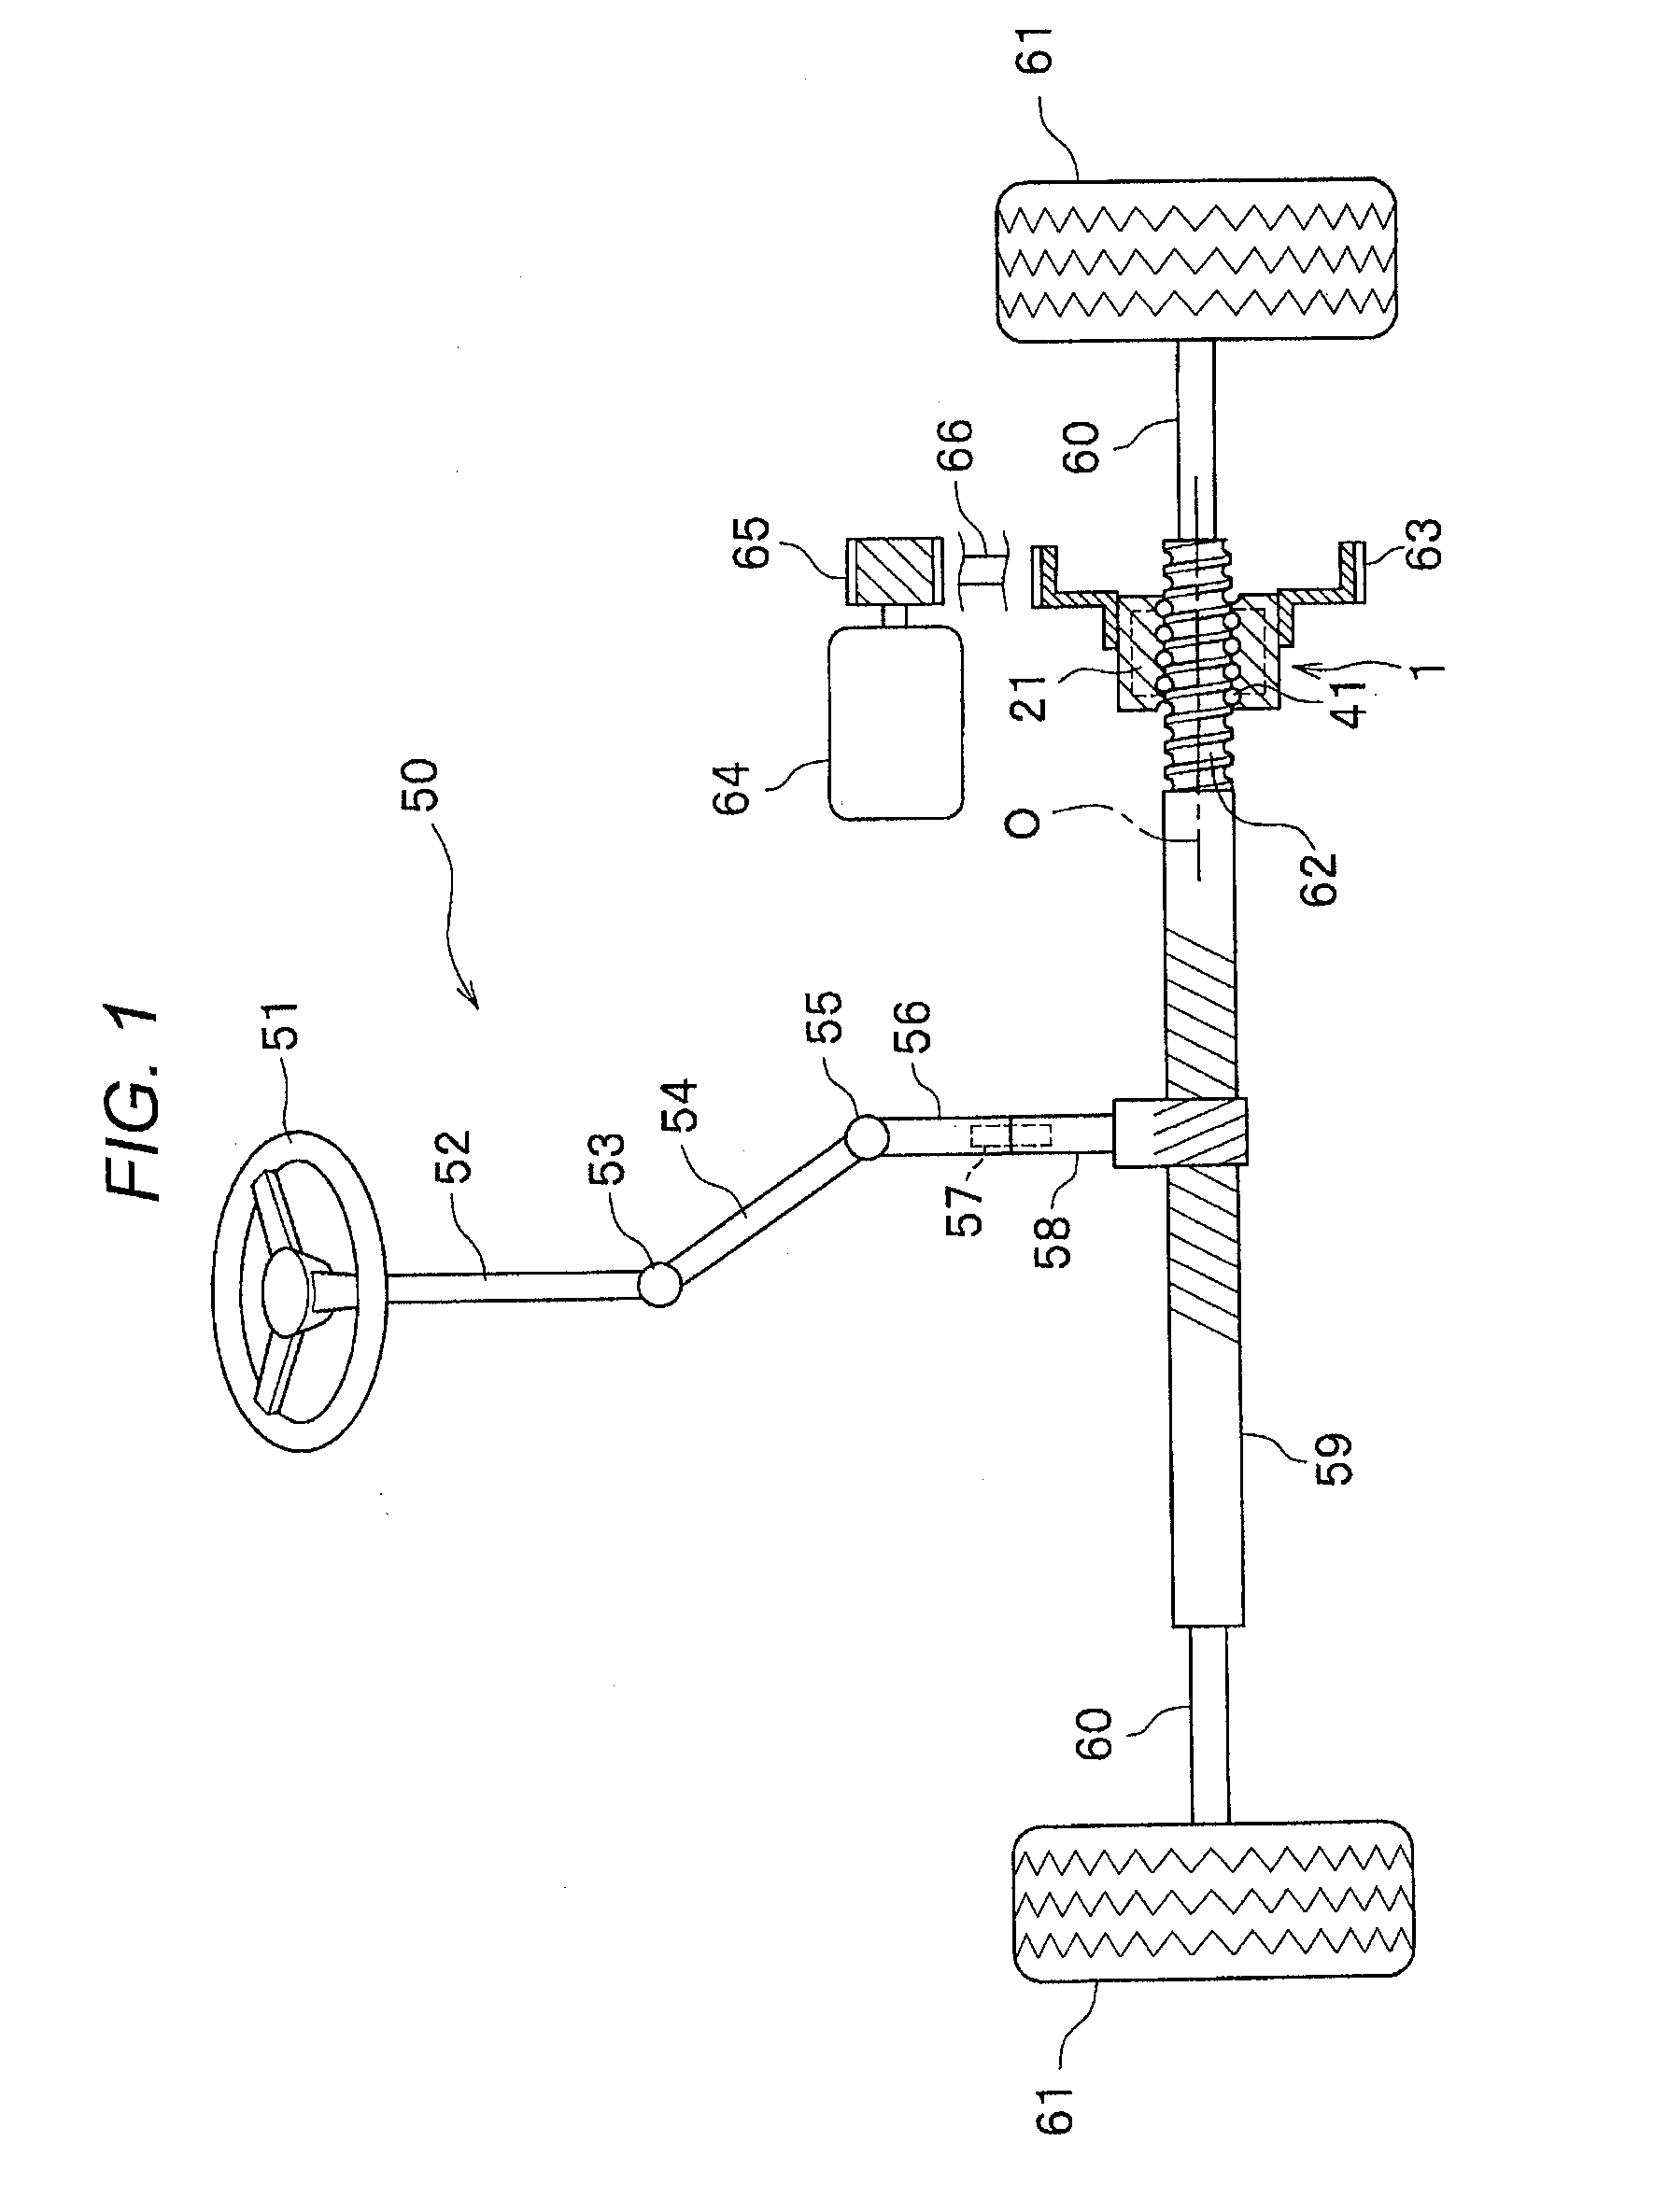 Ball screw and steering apparatus